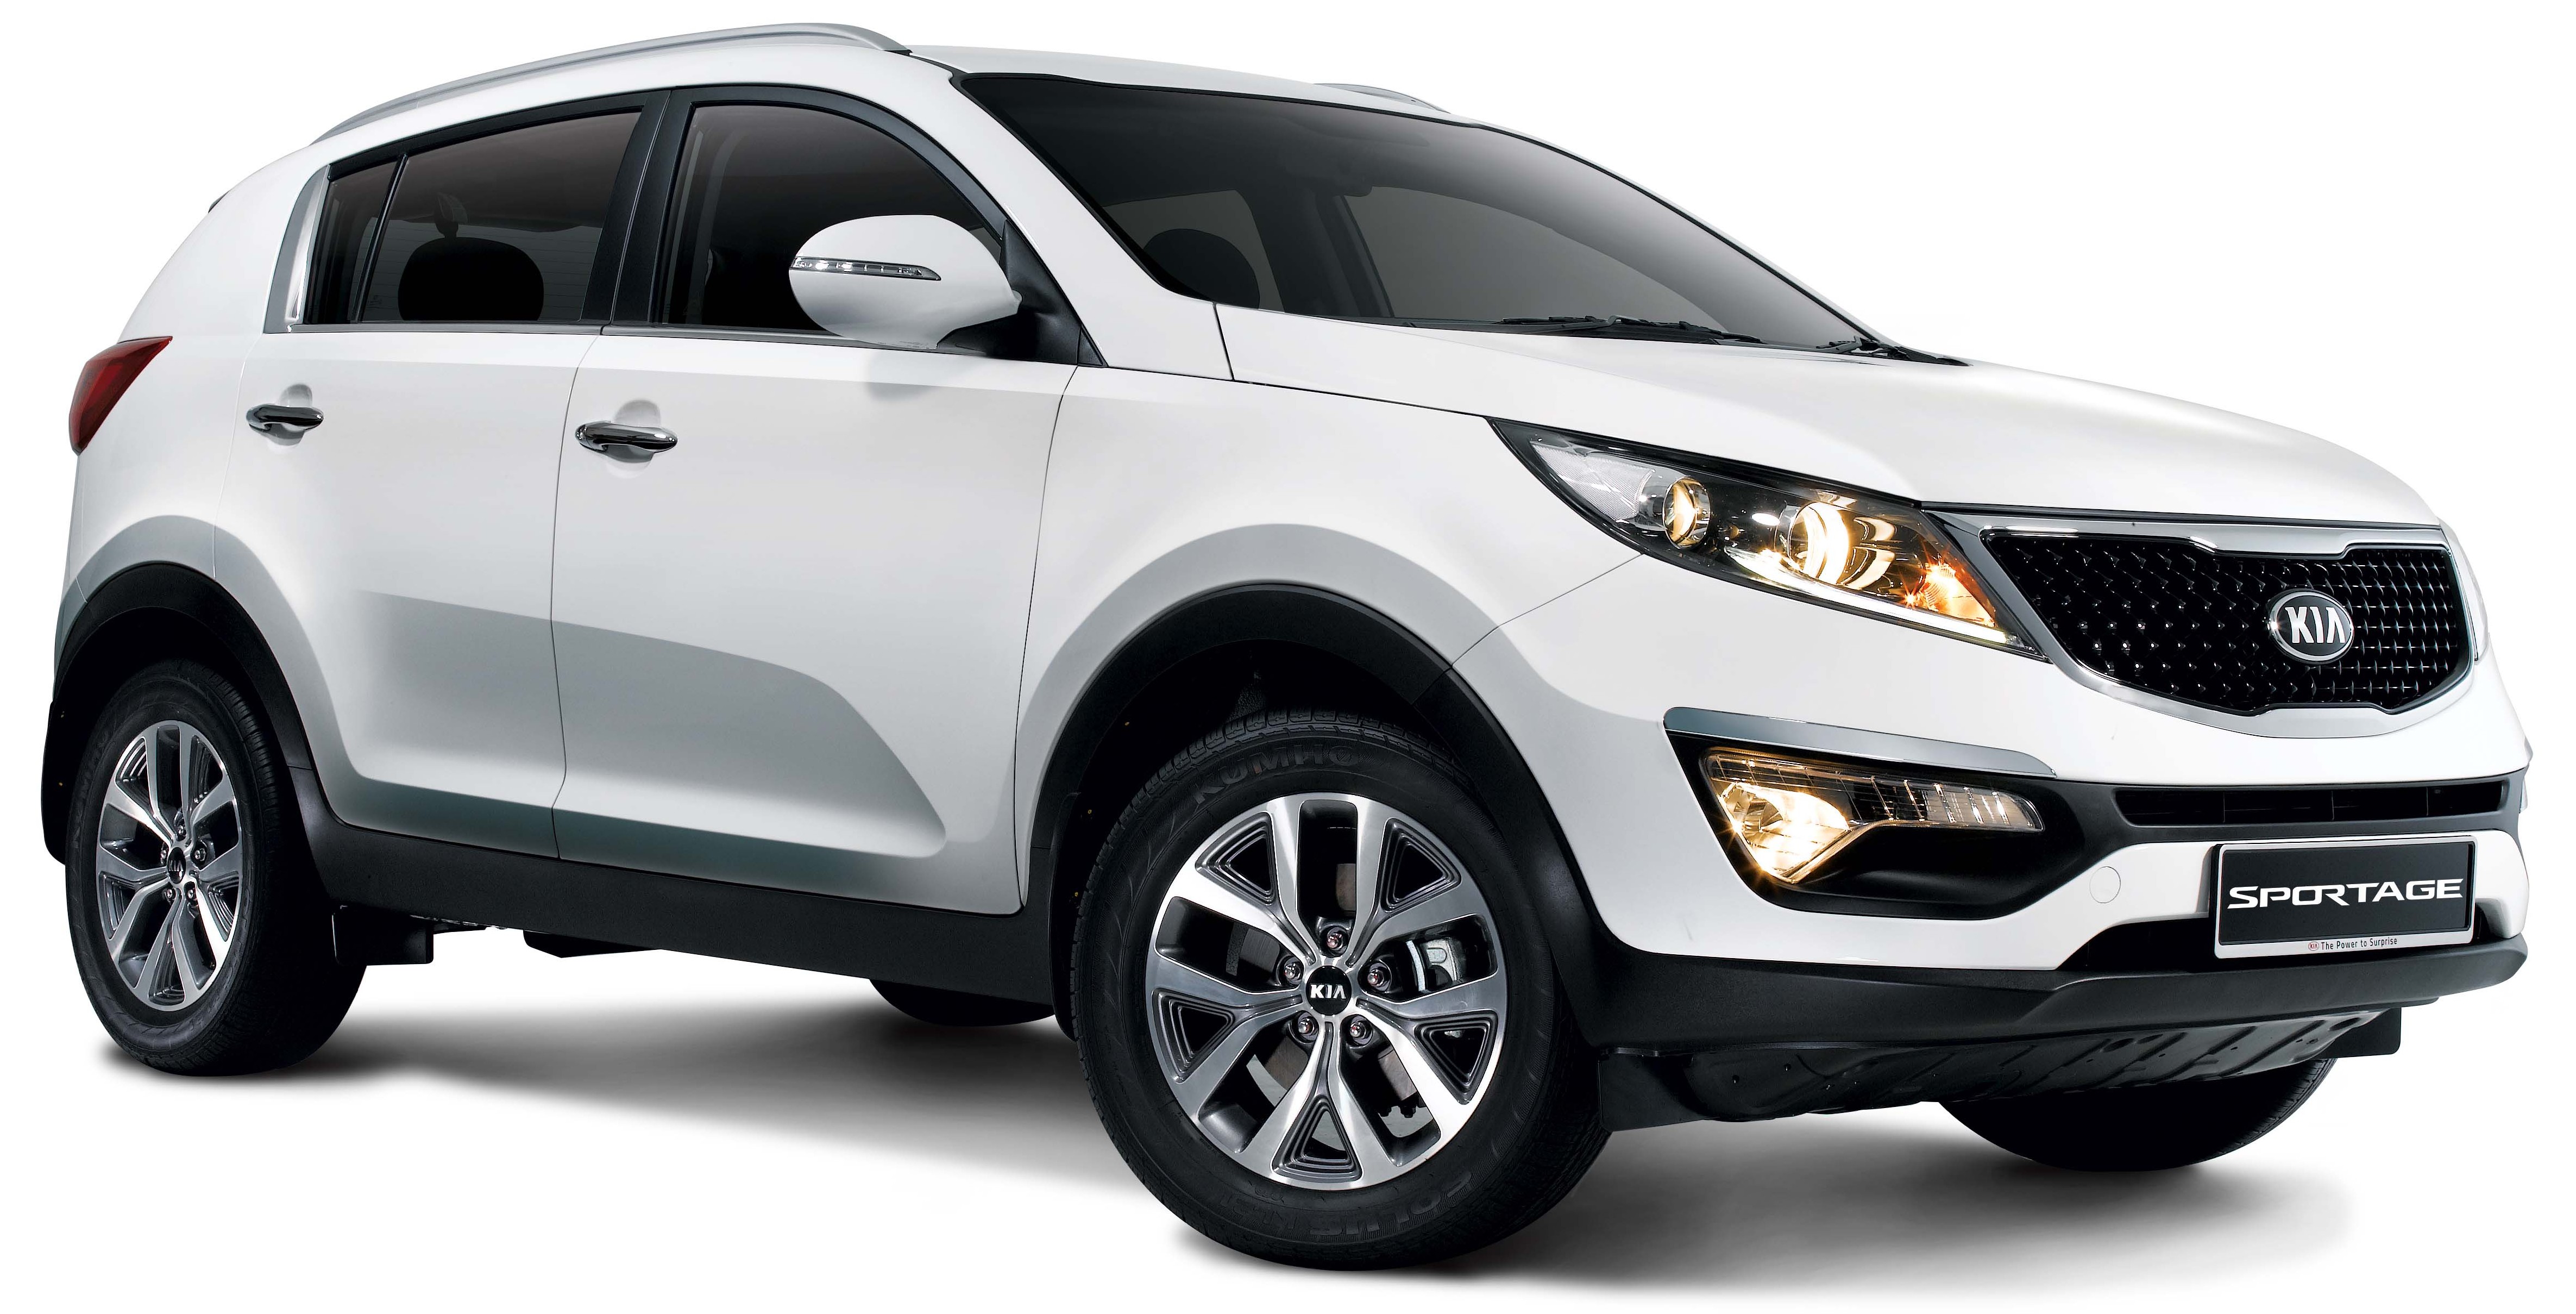 Kia Sportage 2WD now here 2.0L, 6 airbags, RM119k